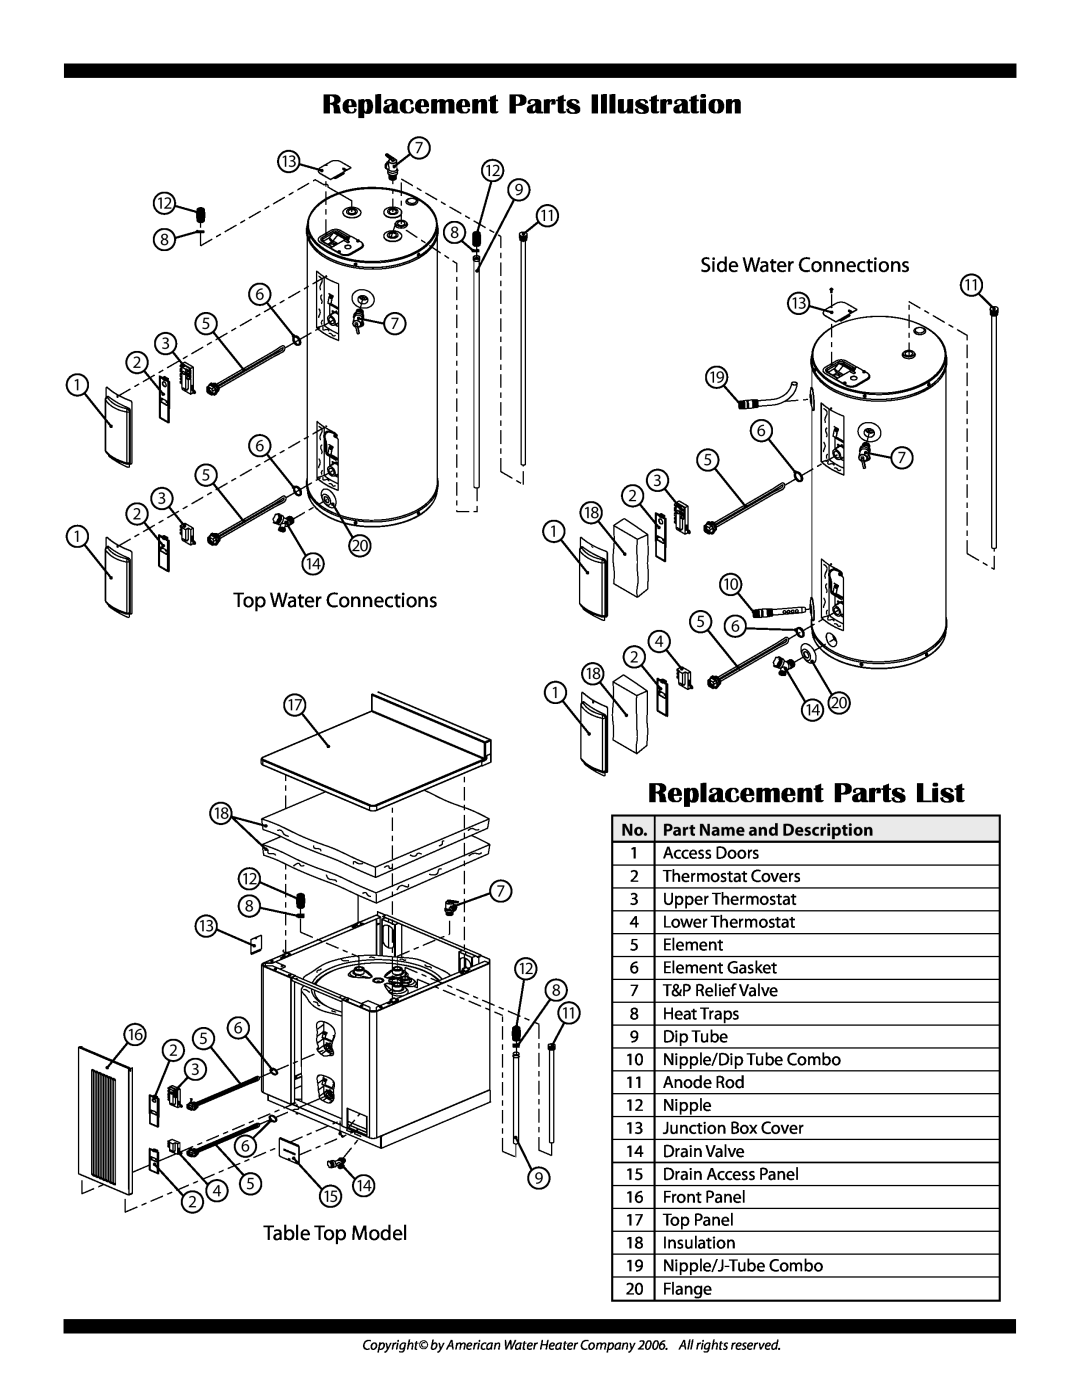 American Water Heater E9 Replacement Parts Illustration, Replacement Parts List, Side Water Connections, Table Top Model 